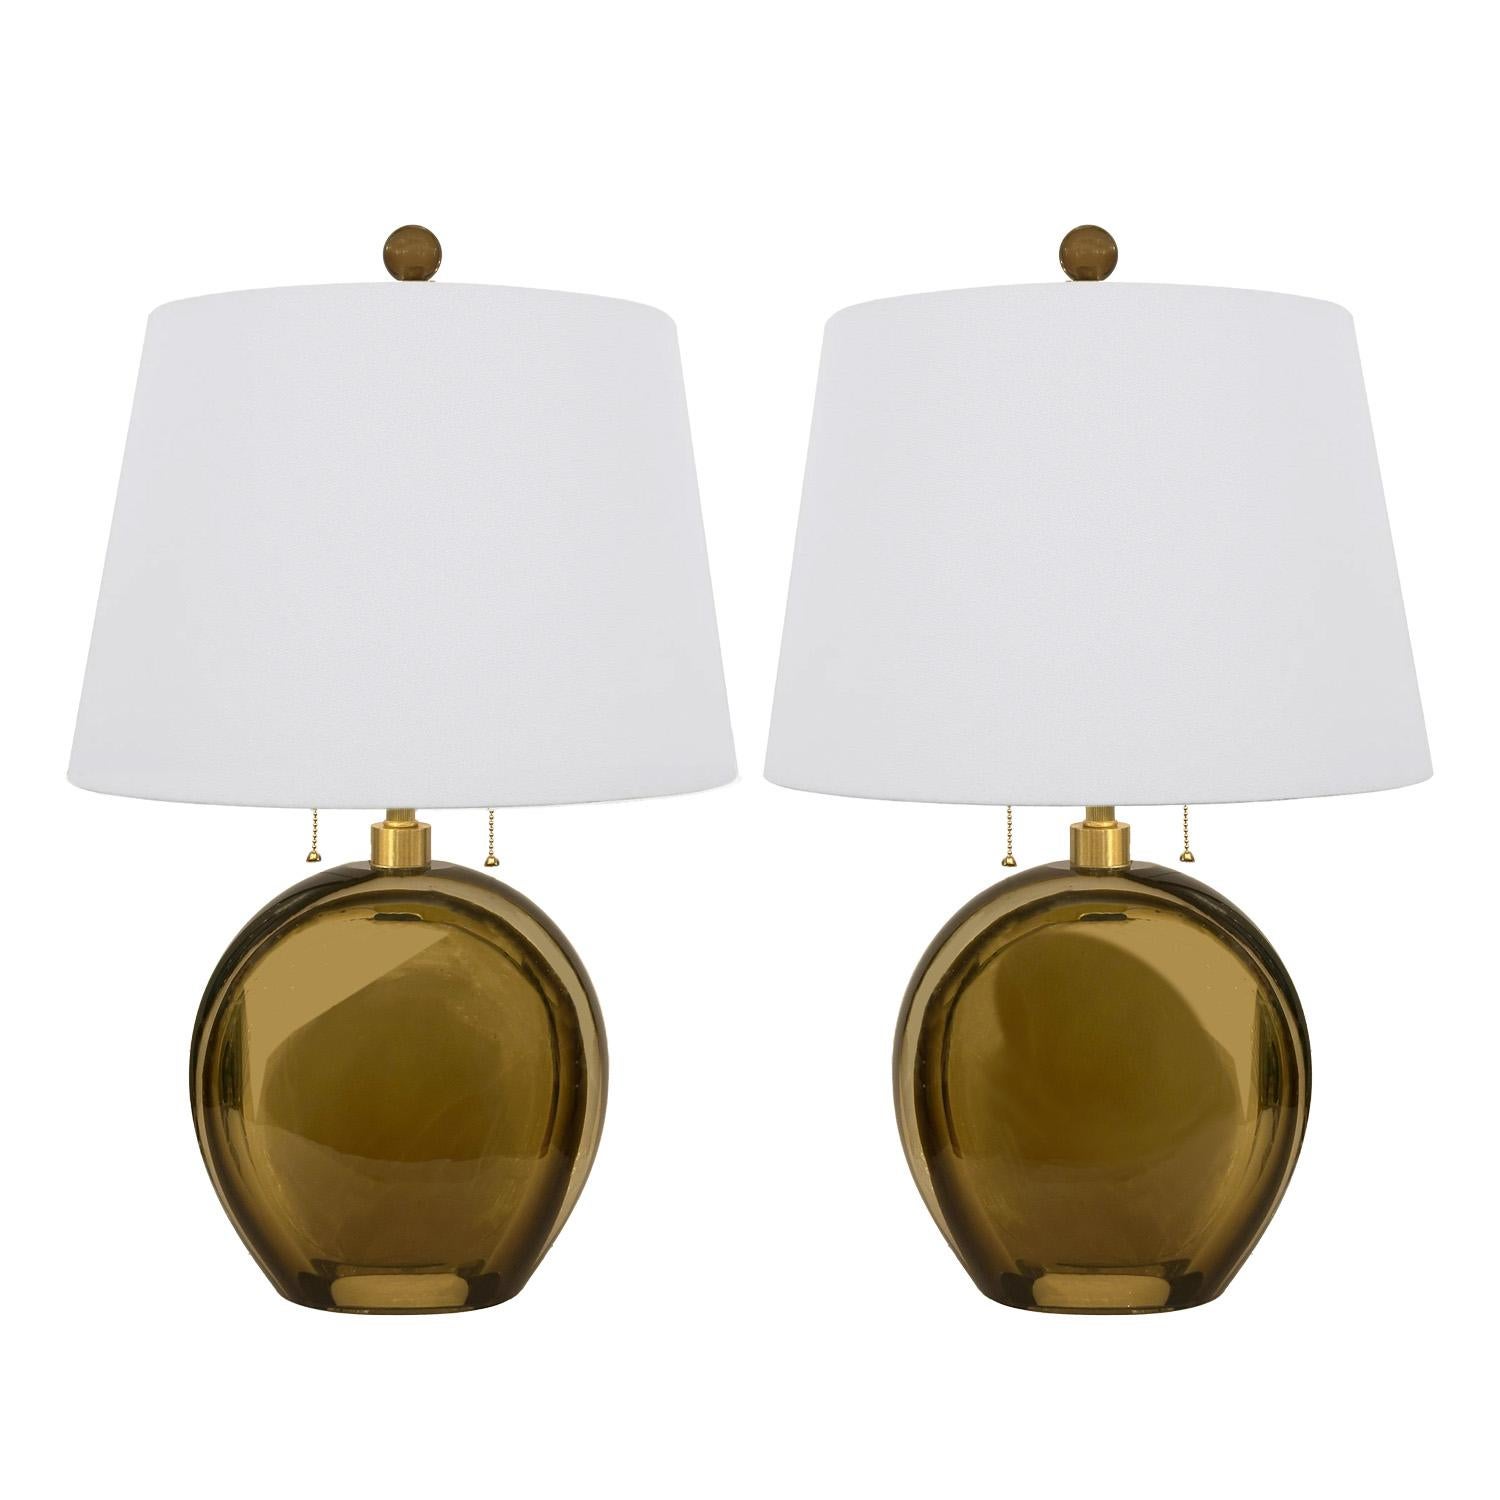  

 

Elegant pair of pagliesco or straw color hand crafted Murano glass table lamps with fluted stem and hardware in a cobination of brushed and polished brass. Each lamp has a double socket cluster with individual pull chain operation for each